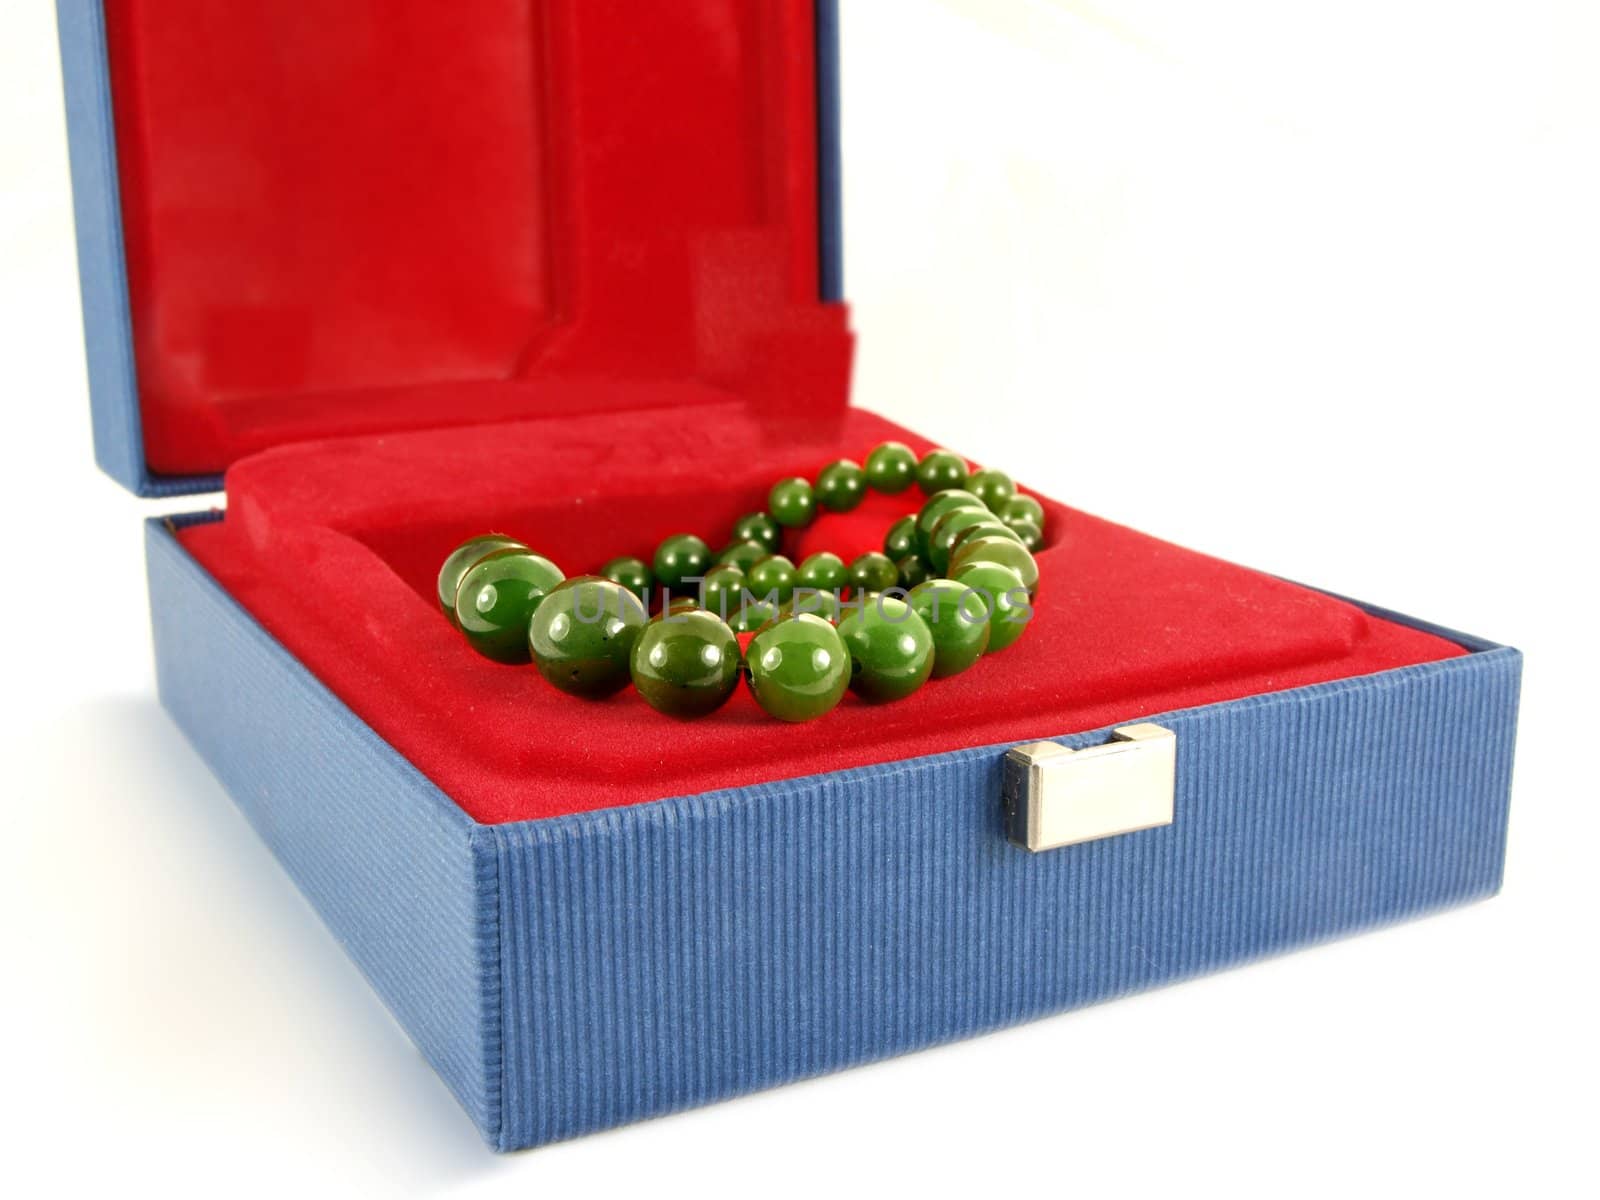 Green gemstone necklace, inside a jewelry box, isolated towards white background